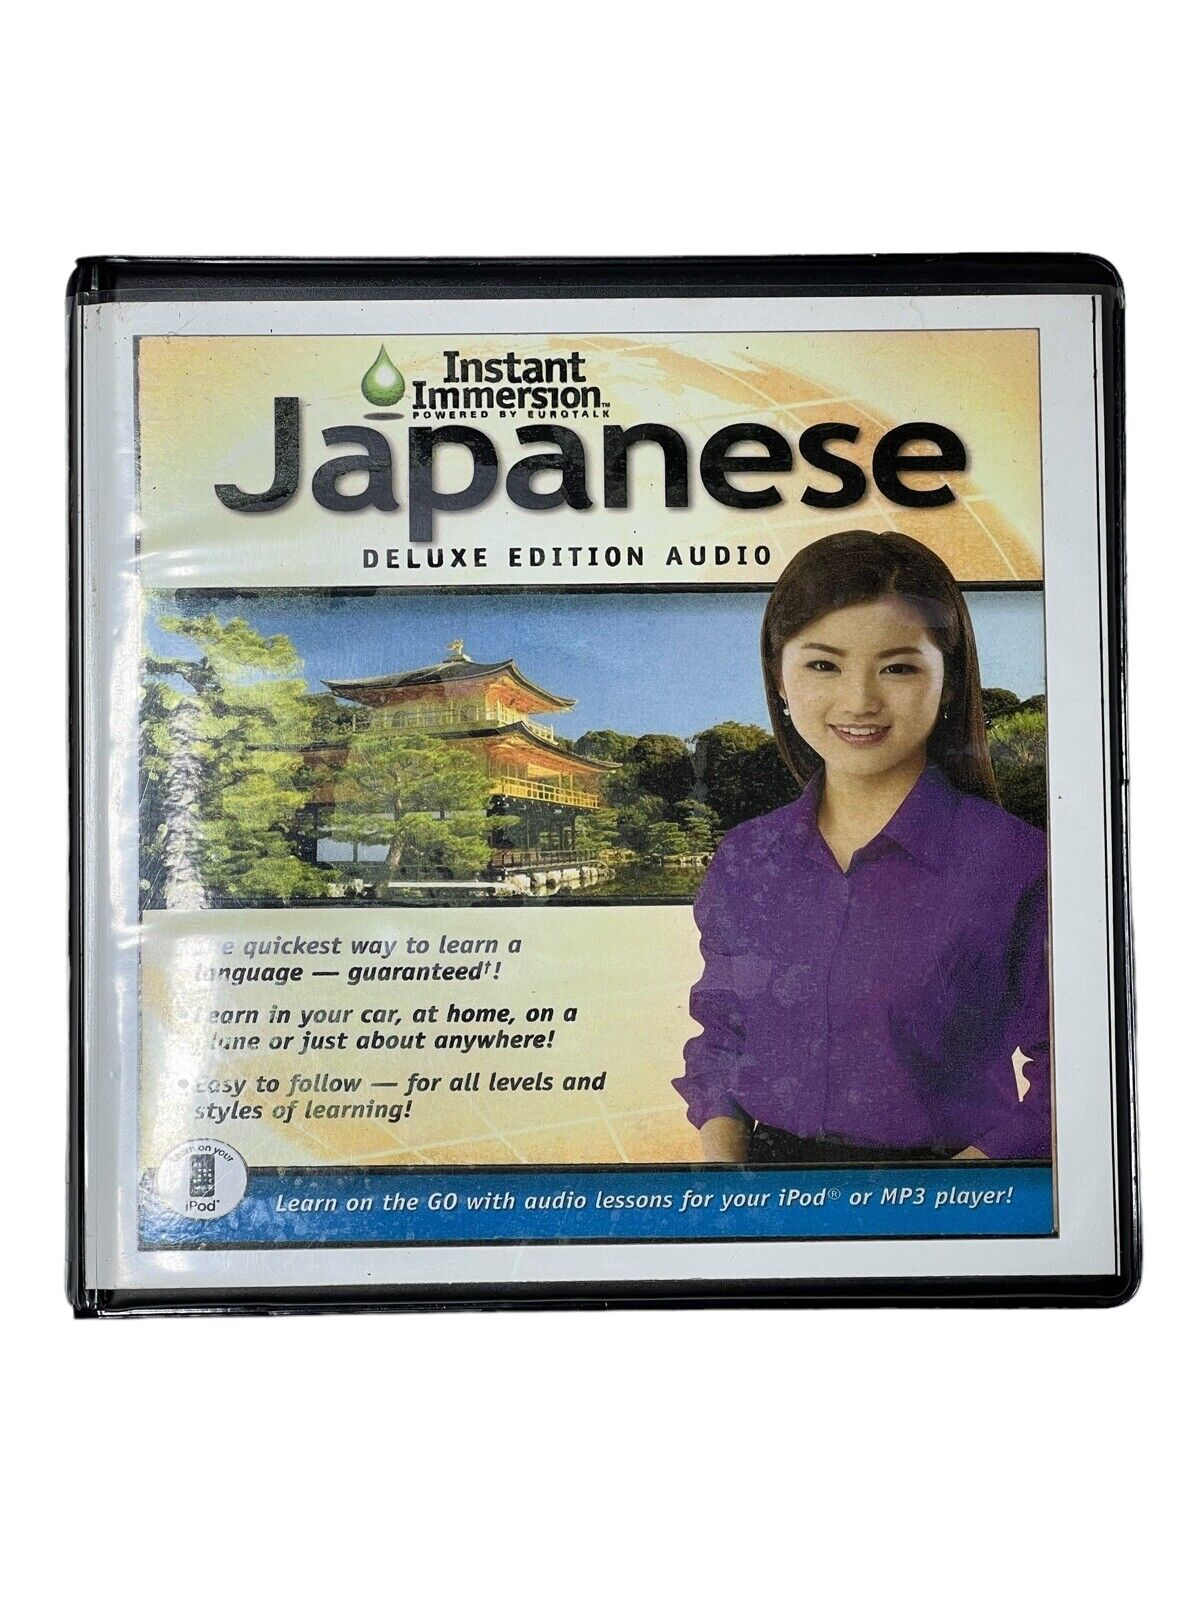 Instant Immersion Japanese Deluxe Edition Audio 16 Disk Set Excellent Condition